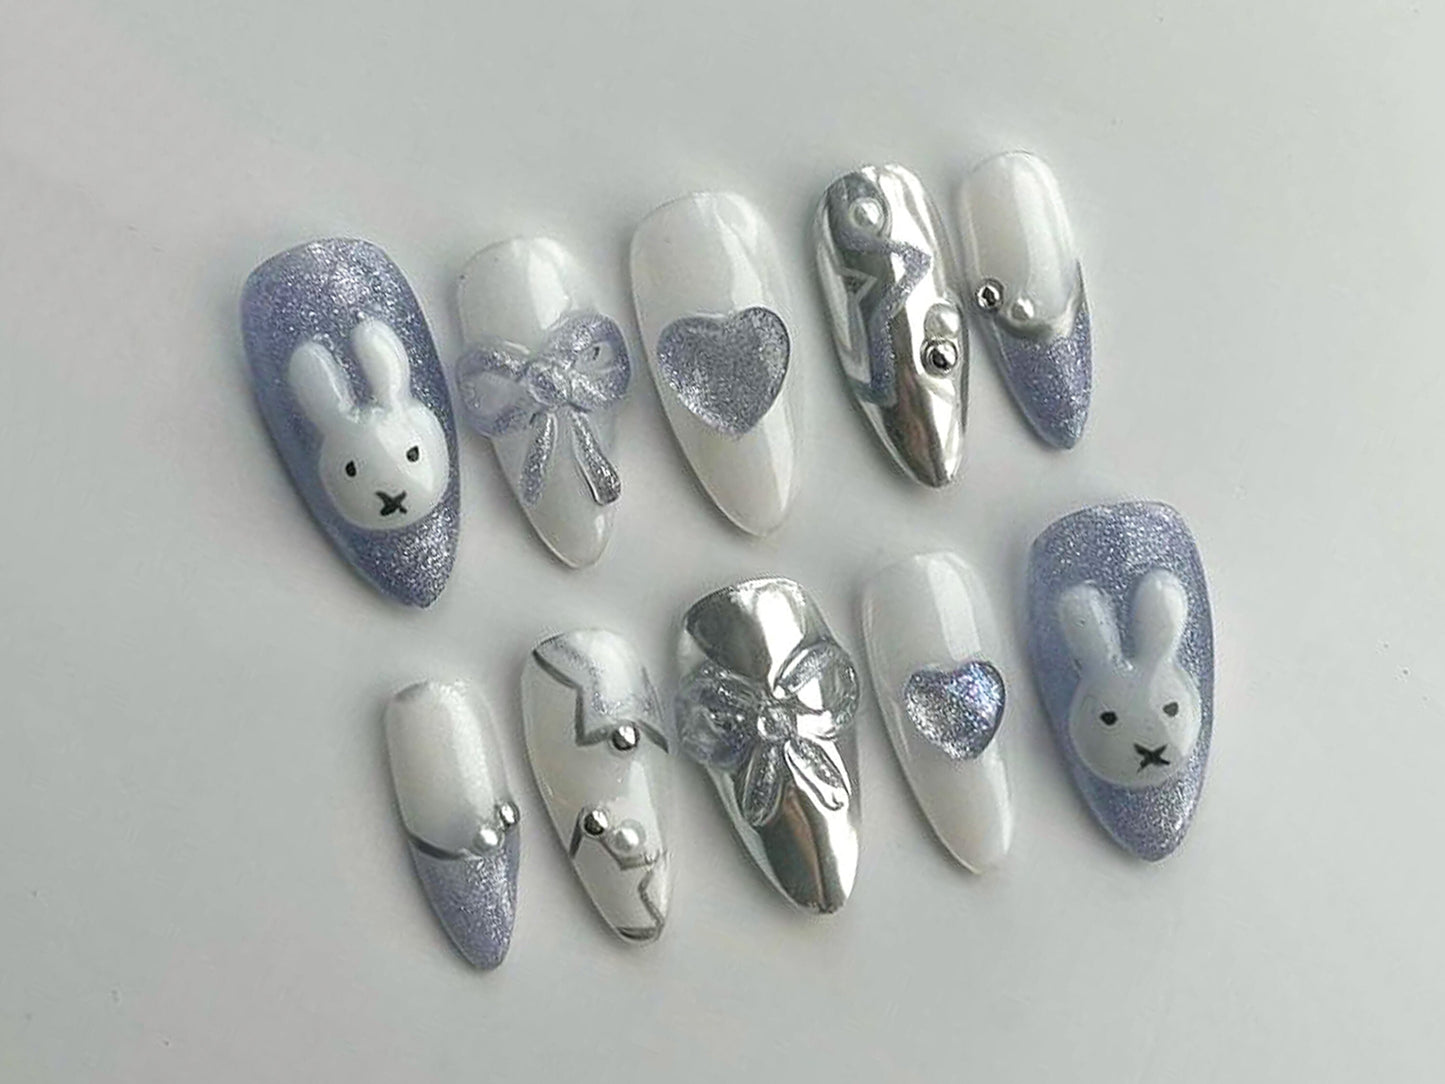 Cute Blue Bunny Press On Nails | Bunnie Designs in Fake Nails | Custom Handpainting 3D Silver Bow with Heart Chrome | Kawaii Nails | J110